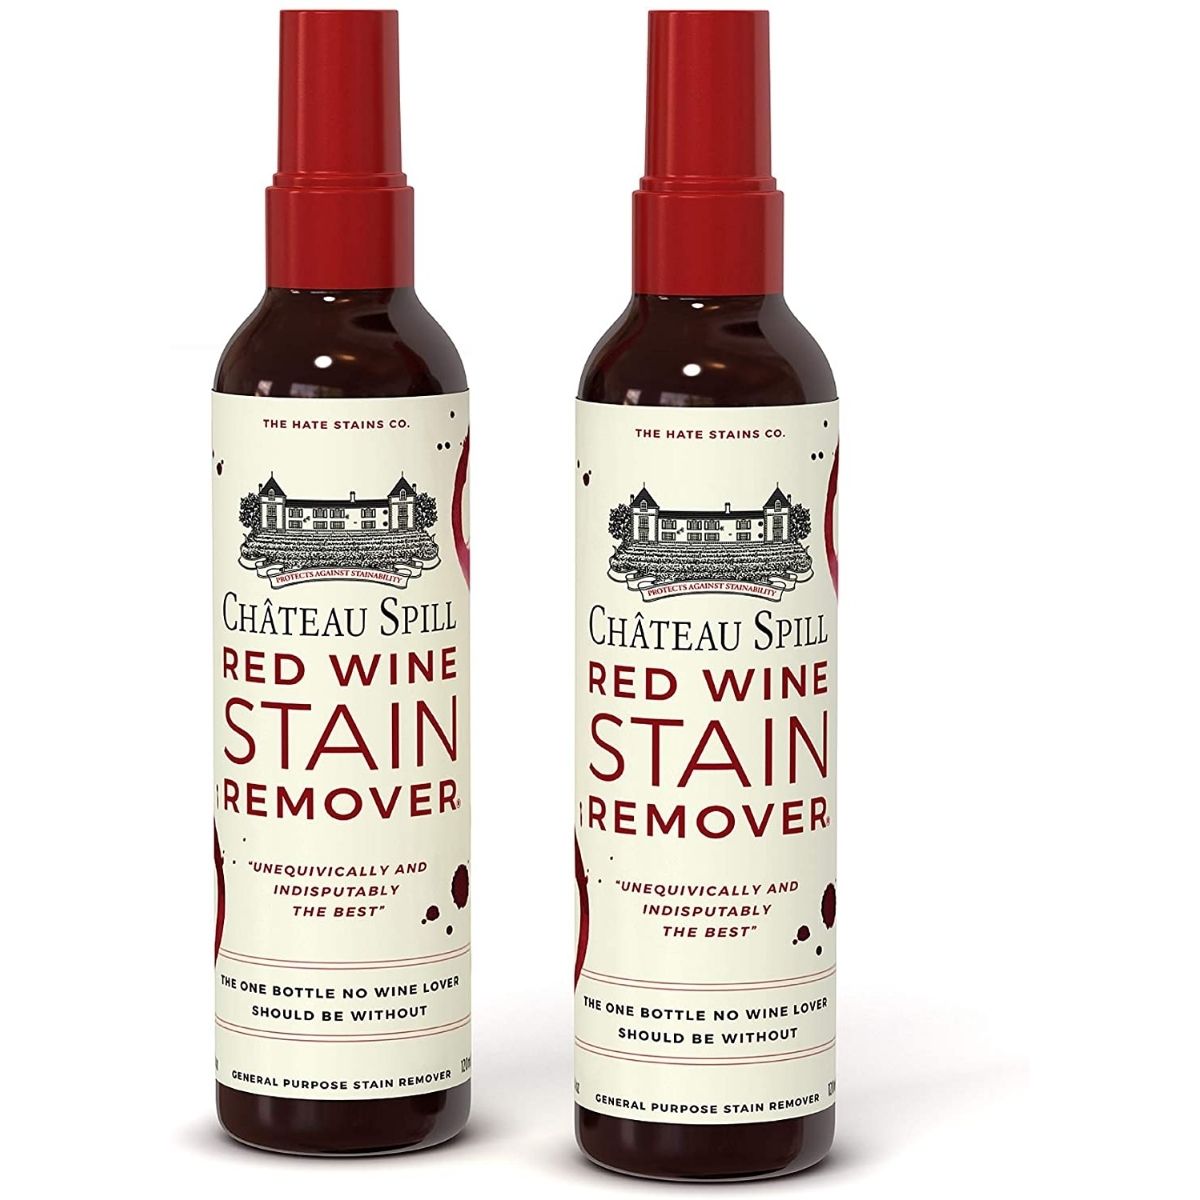 The Best Gifts for Wine Lovers Option: Chateau Spill Red Wine Stain Remover